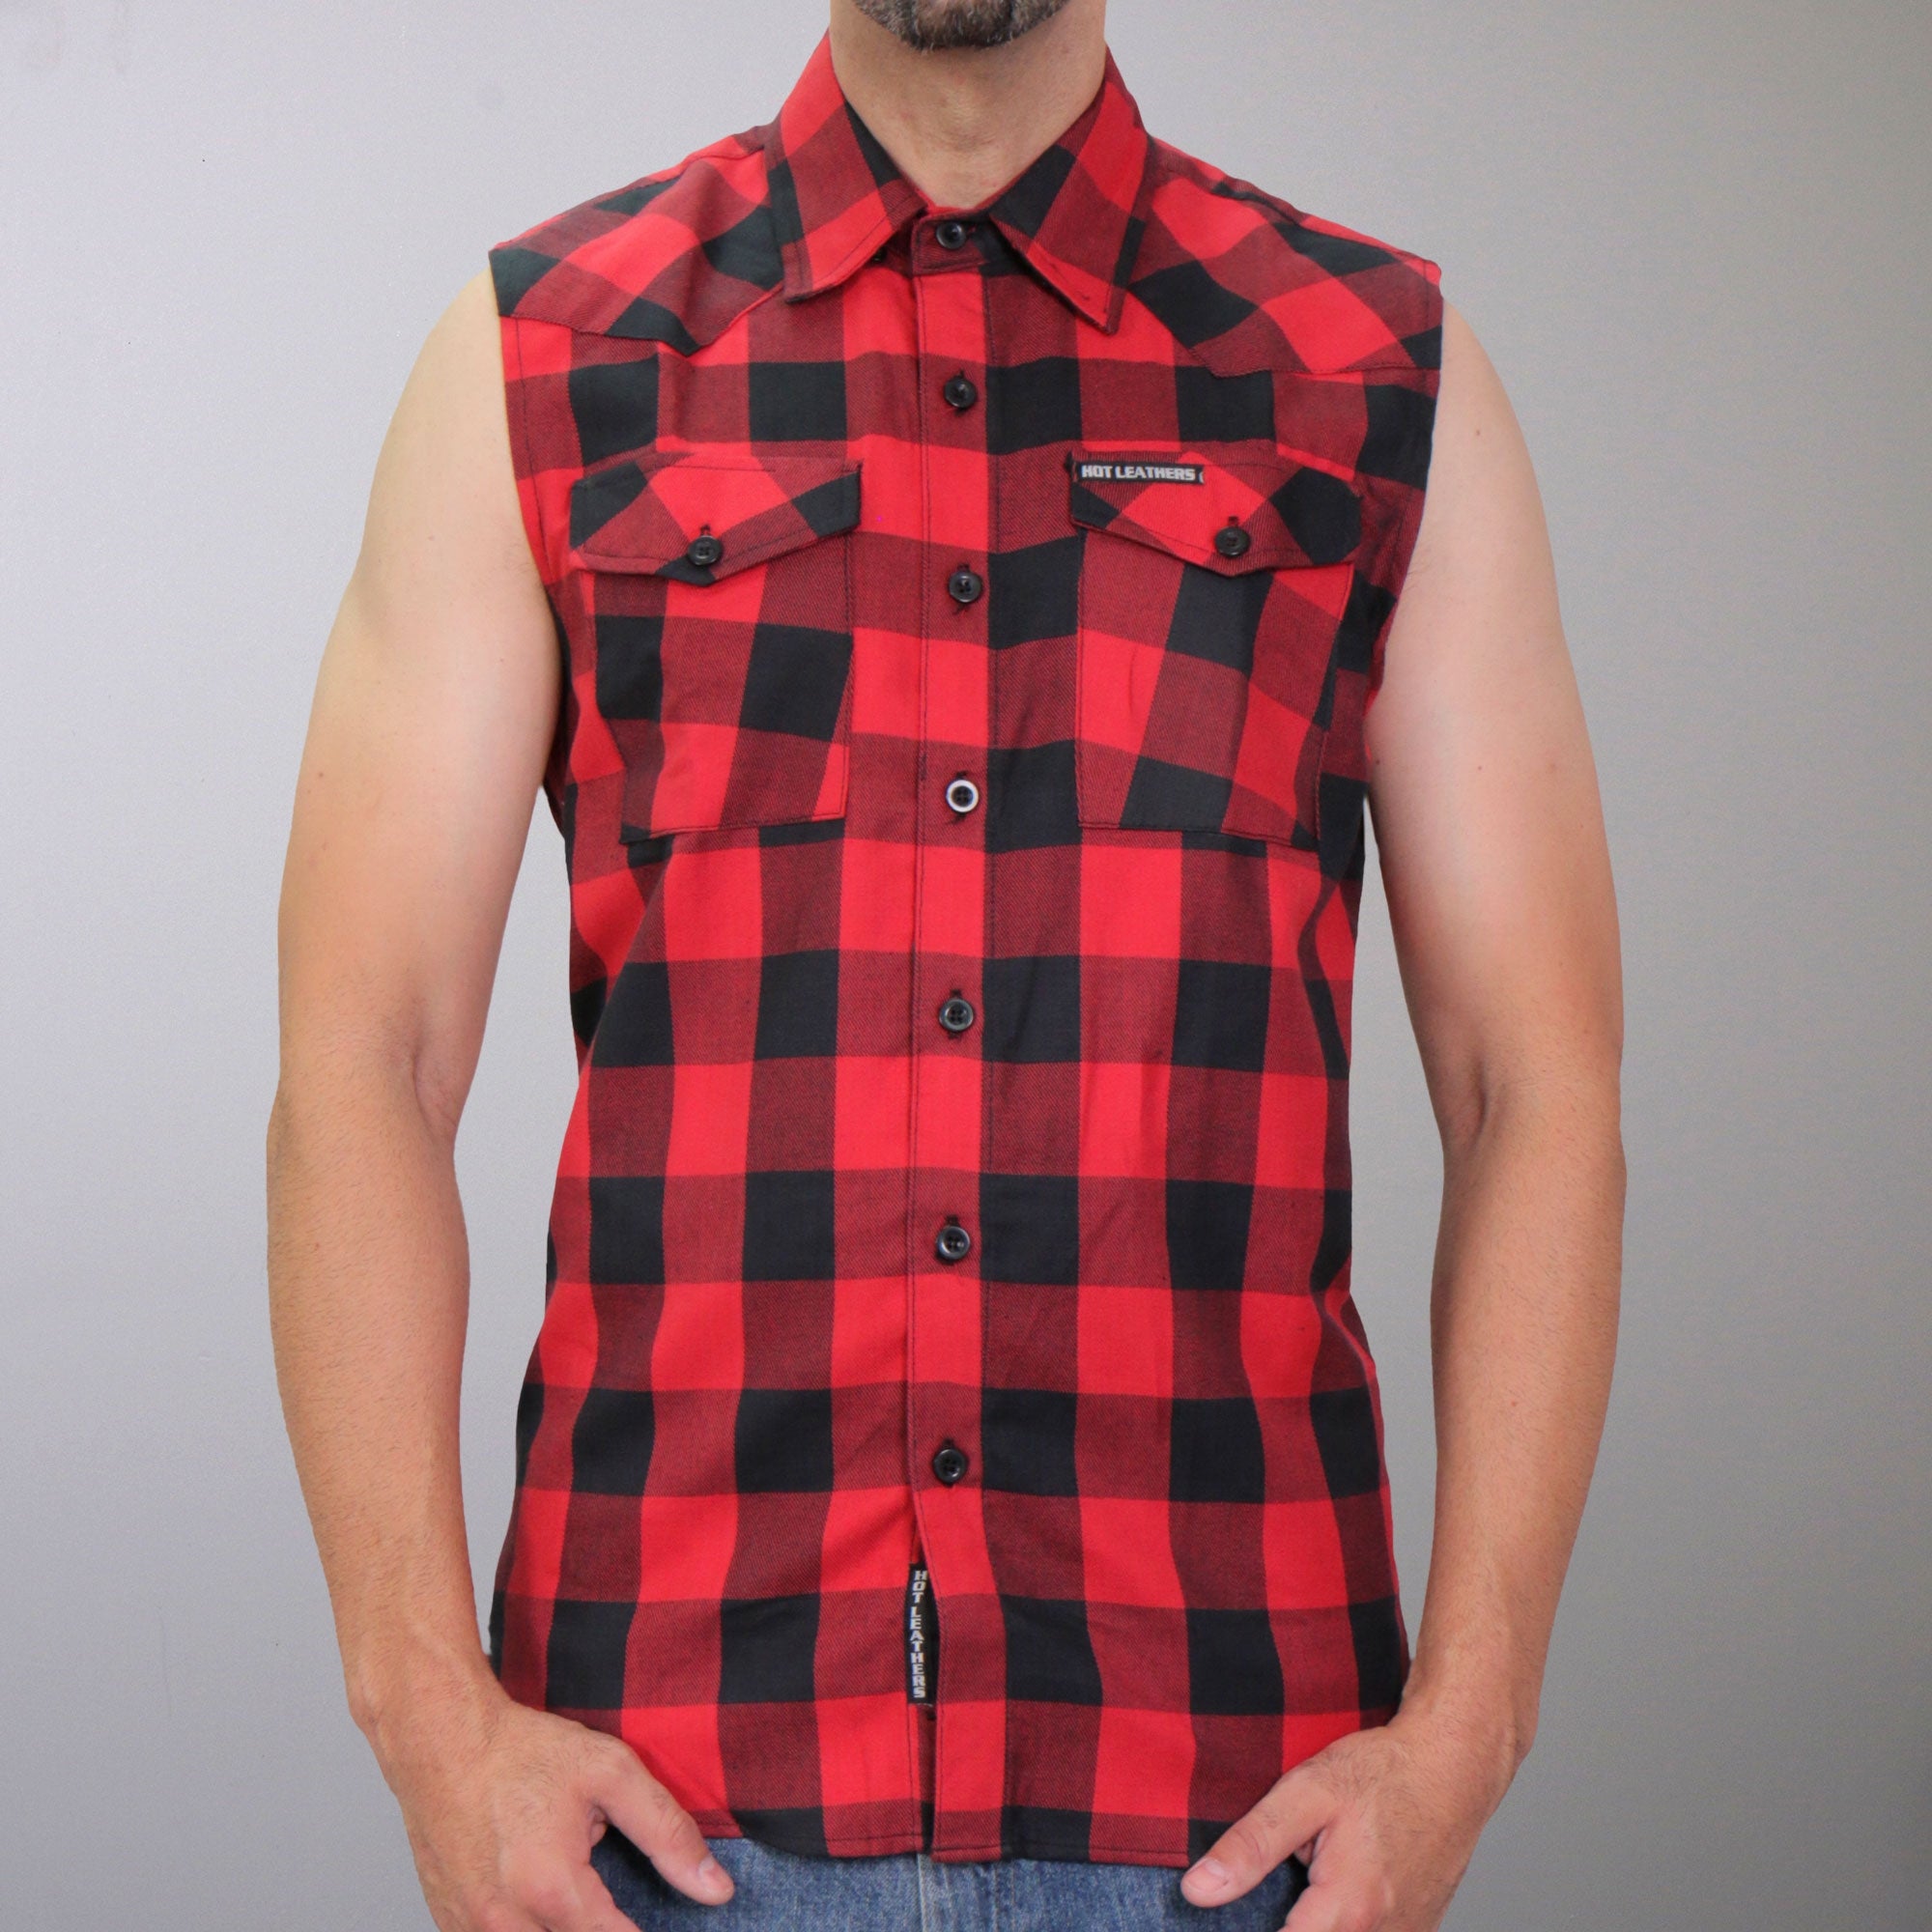 CD D C Sleeveless Leather Shirt - Trendy & Stylish for All Occasions in Red Red / 4X-Large